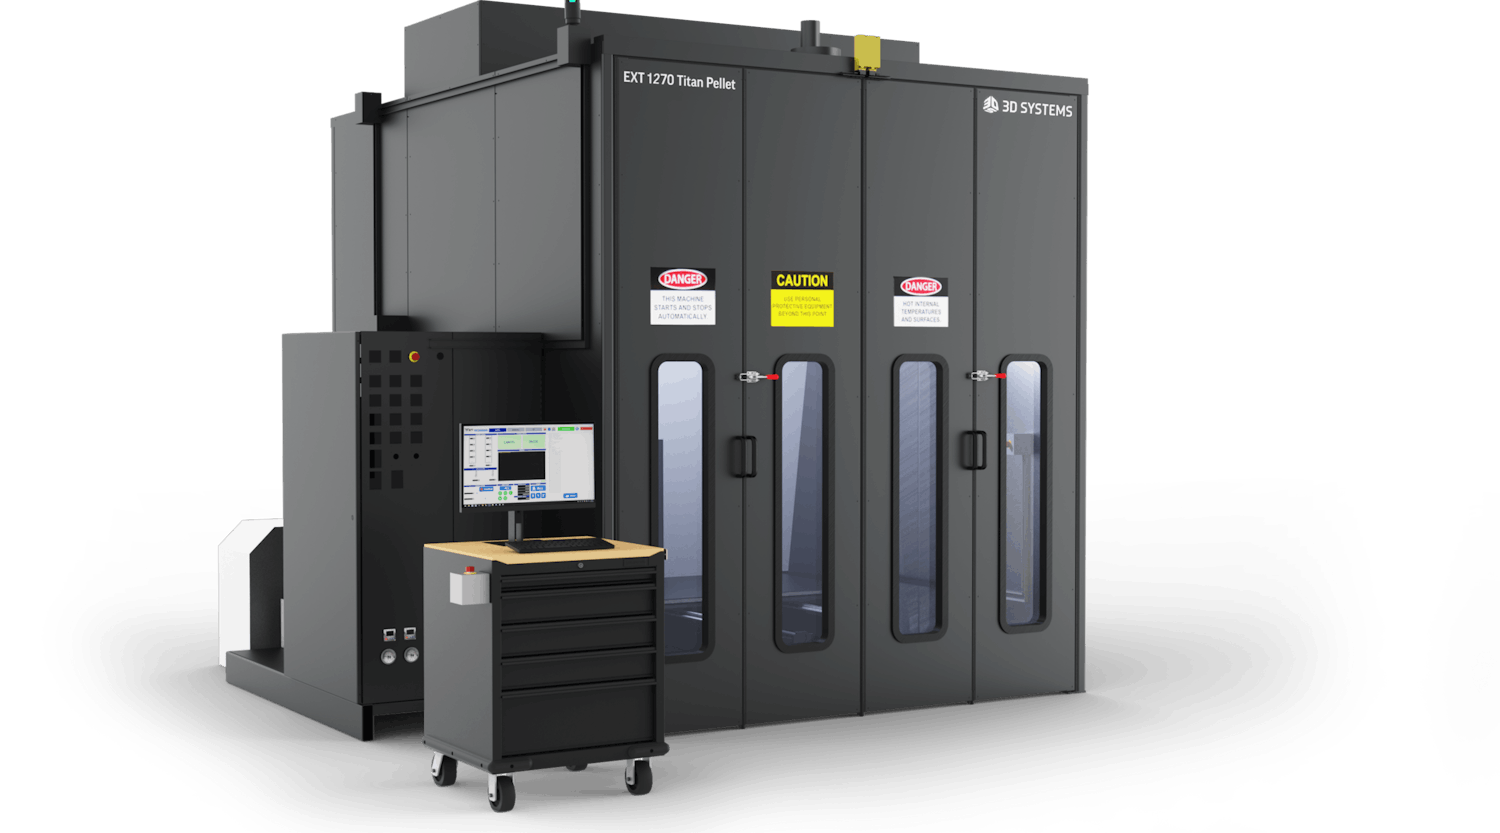 Duo Form uses its 3D Systems EXT 1270 Titan Pellet (formerly known as Titan Atlas 3.6) 3D printer to produce thermoforming molds.